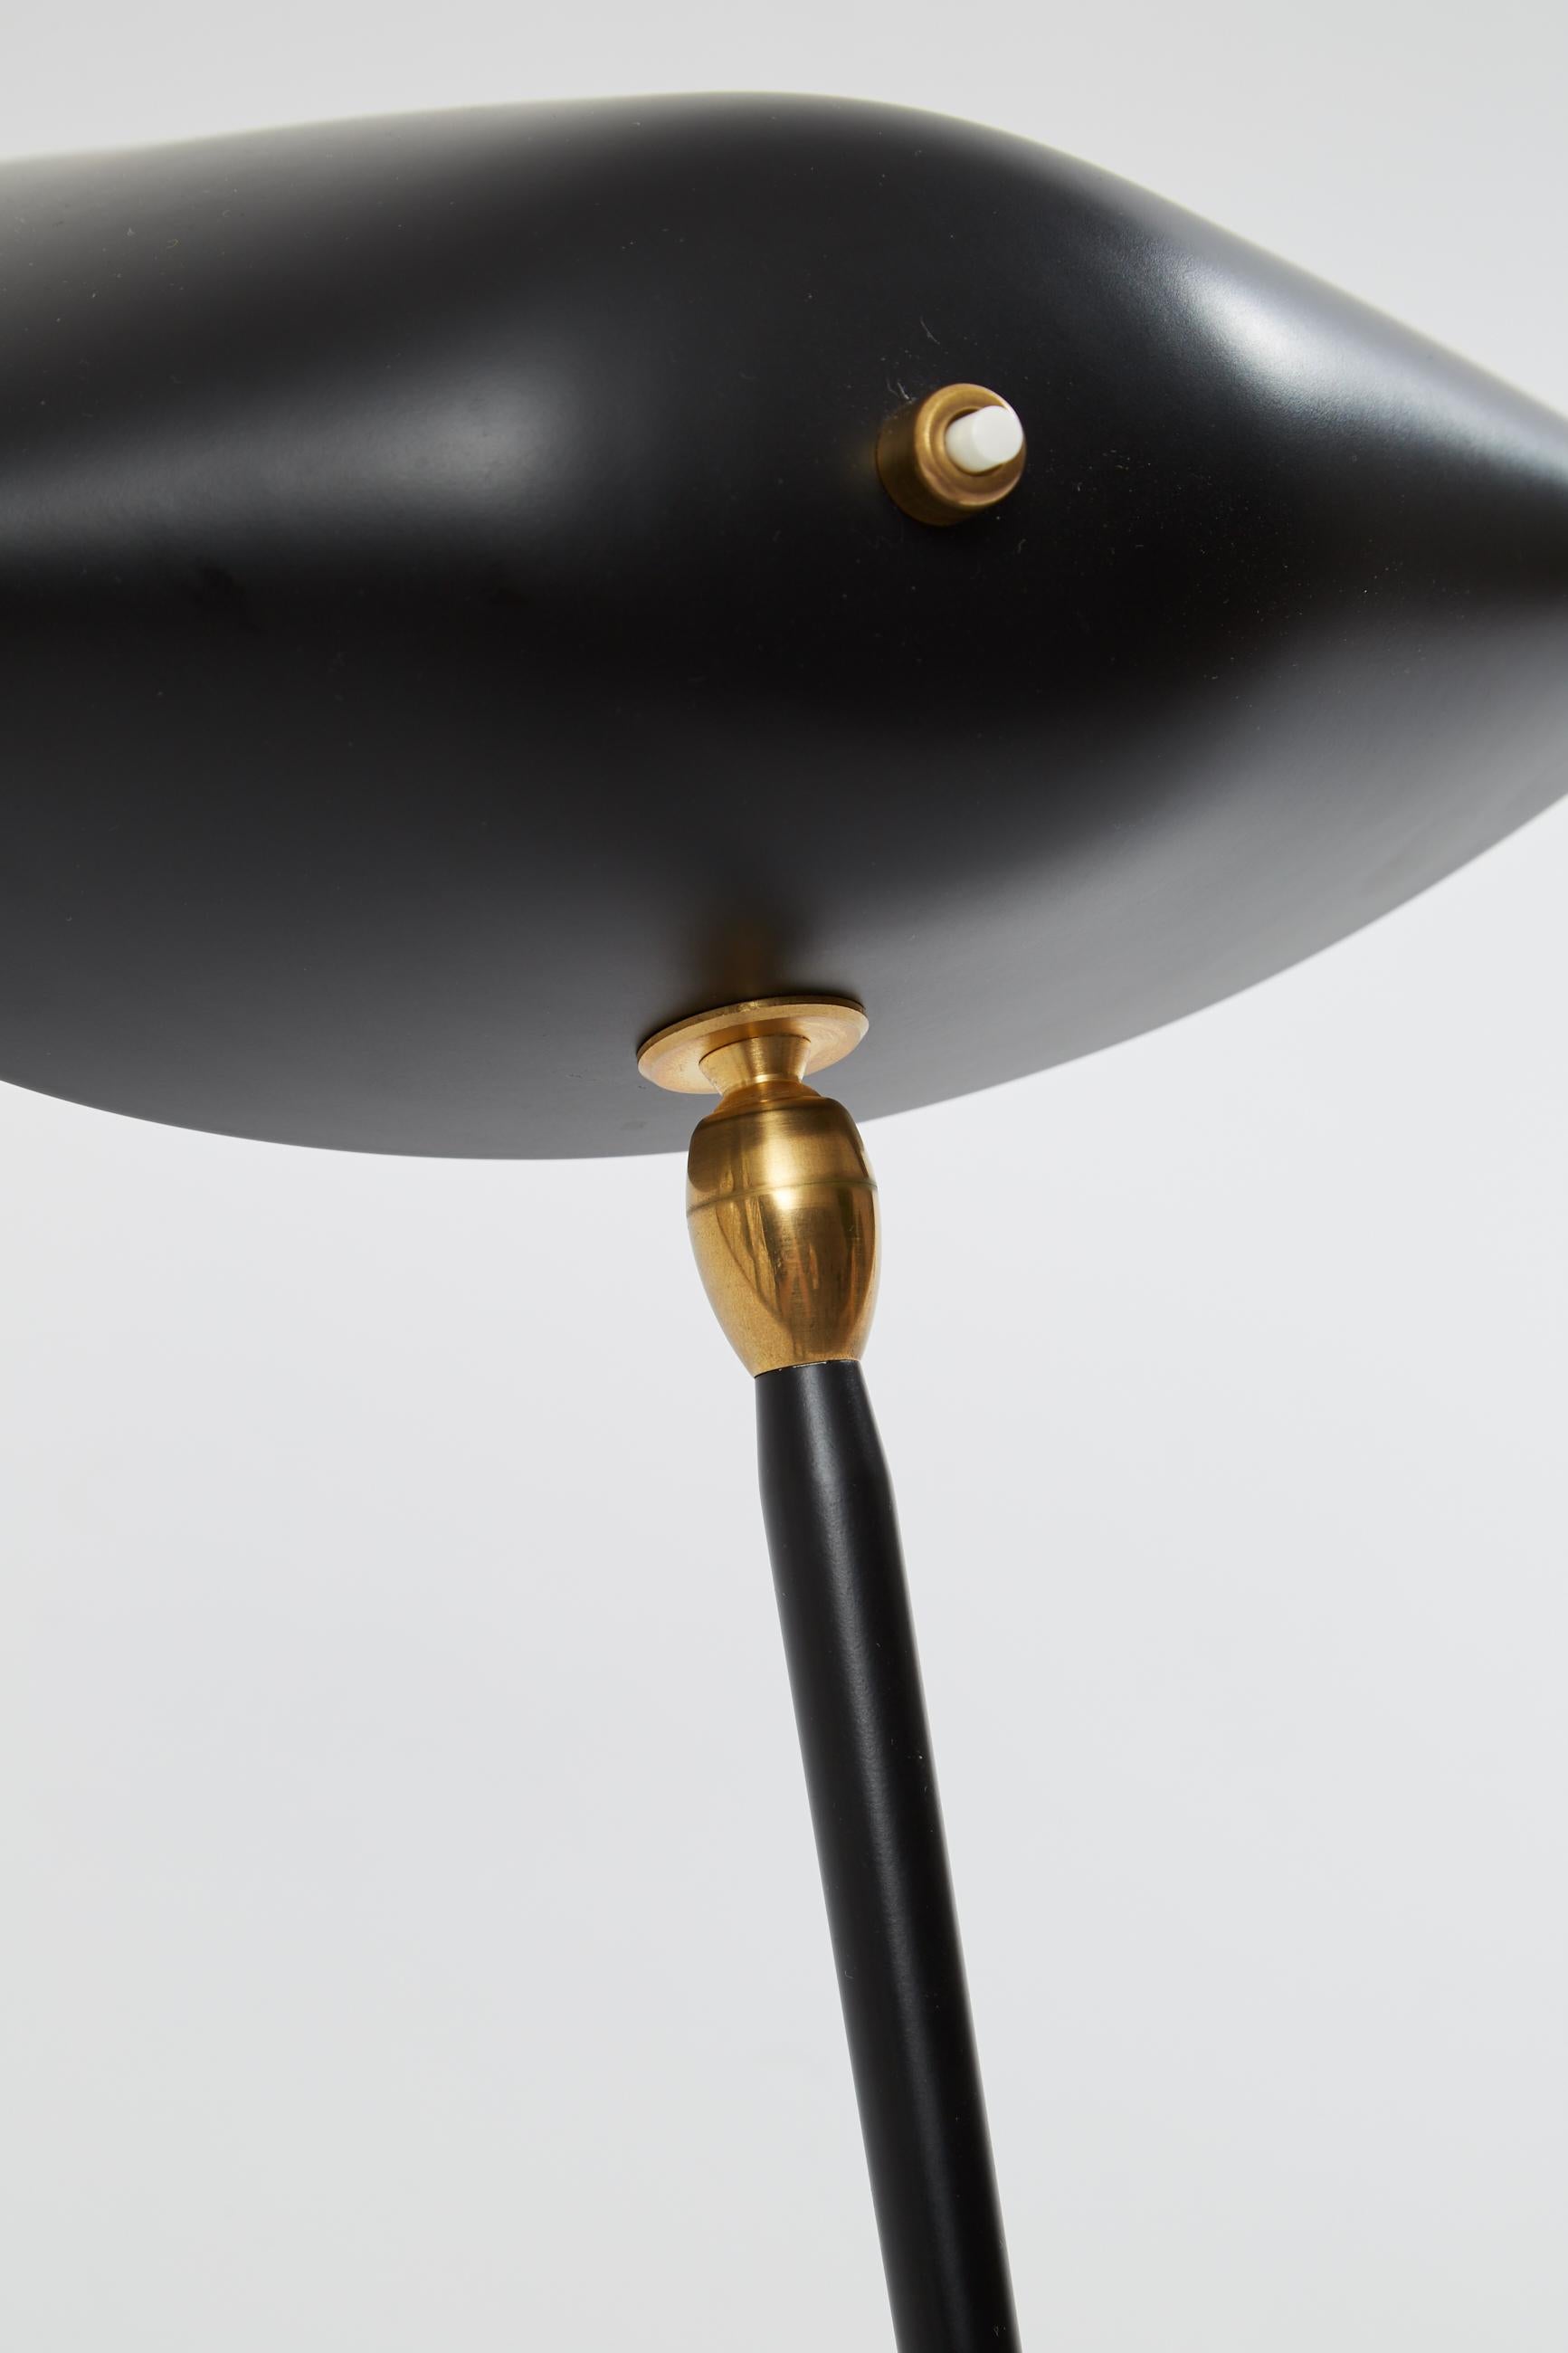 Three-arm floor lamp by Serge Mouille. Originally designed by Serge Mouille in 1952. This light is a licensed re-edition from the “Black Shapes” series currently manufactured by Editions Serge Mouille in France. Steel and painted black base, with